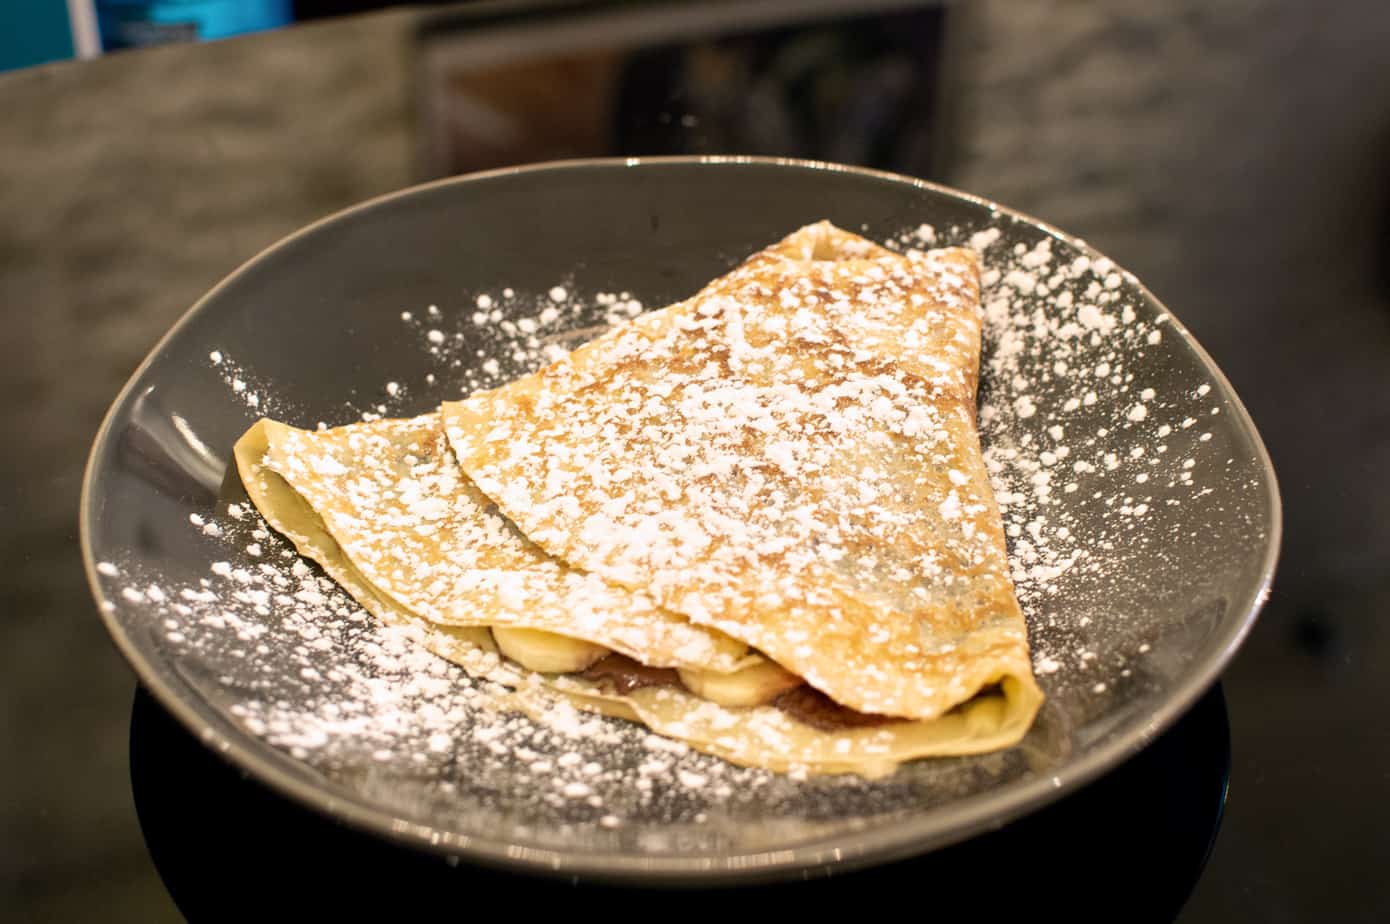 Two crepes on a plate sprinkled with powdered sugar